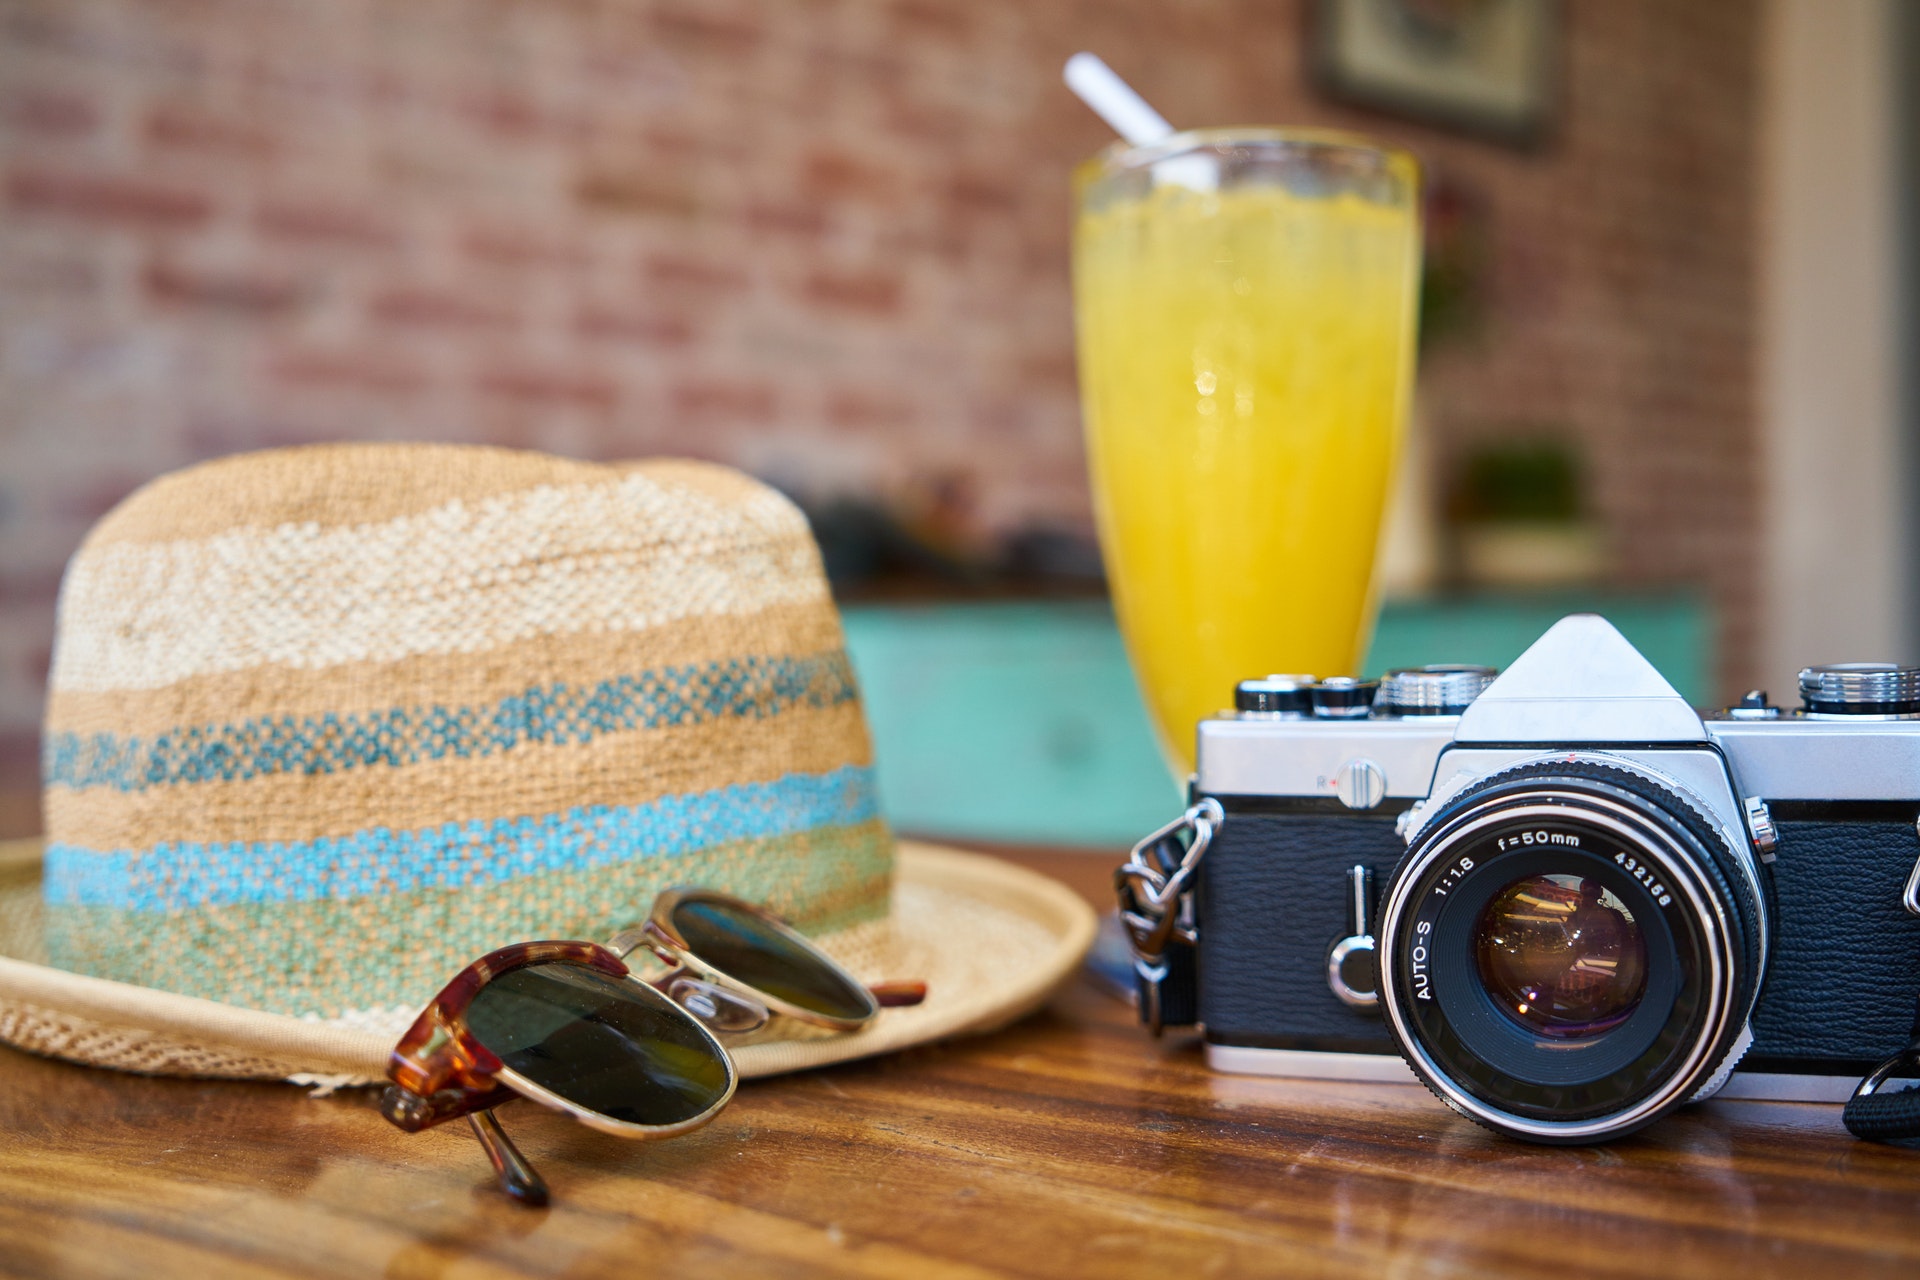 Travel Safety Tips to Protect Yourself on Vacation